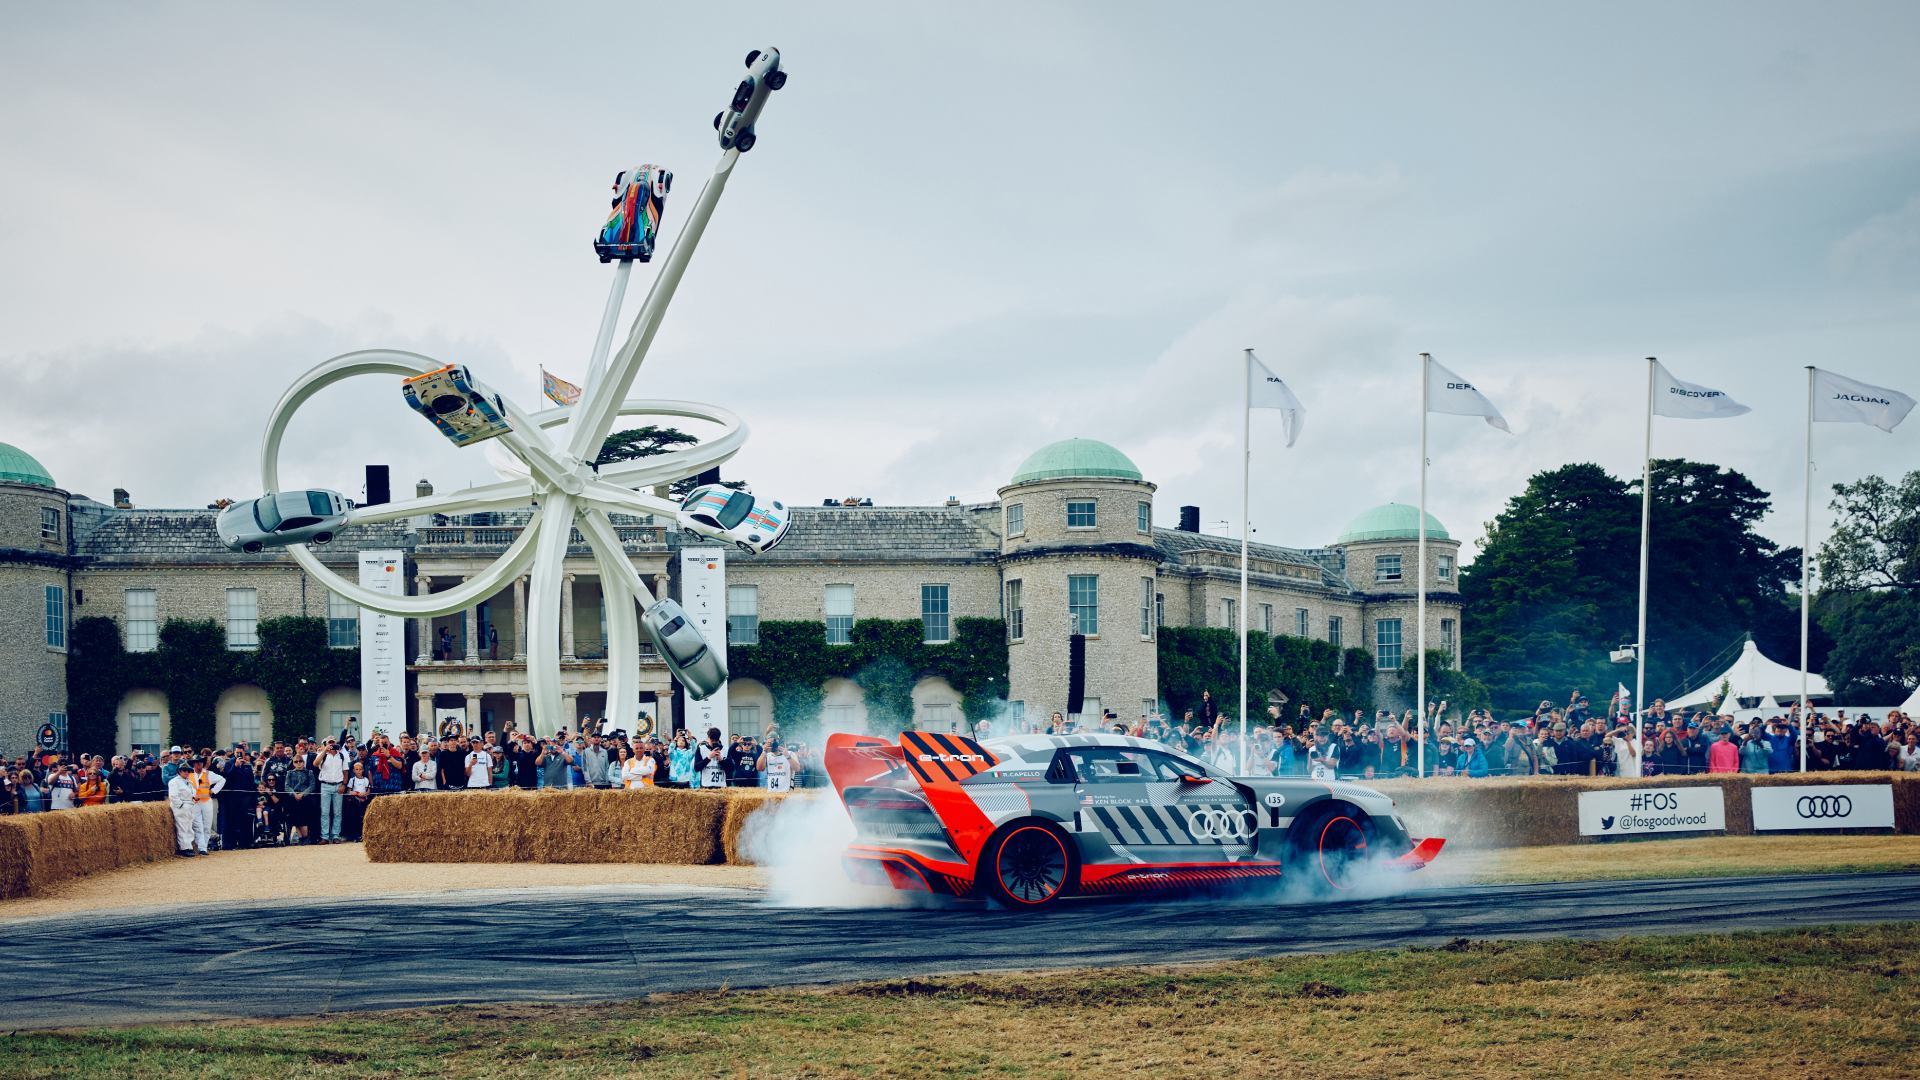 The Audi S1 Hoonitron in front of Goodwood House.